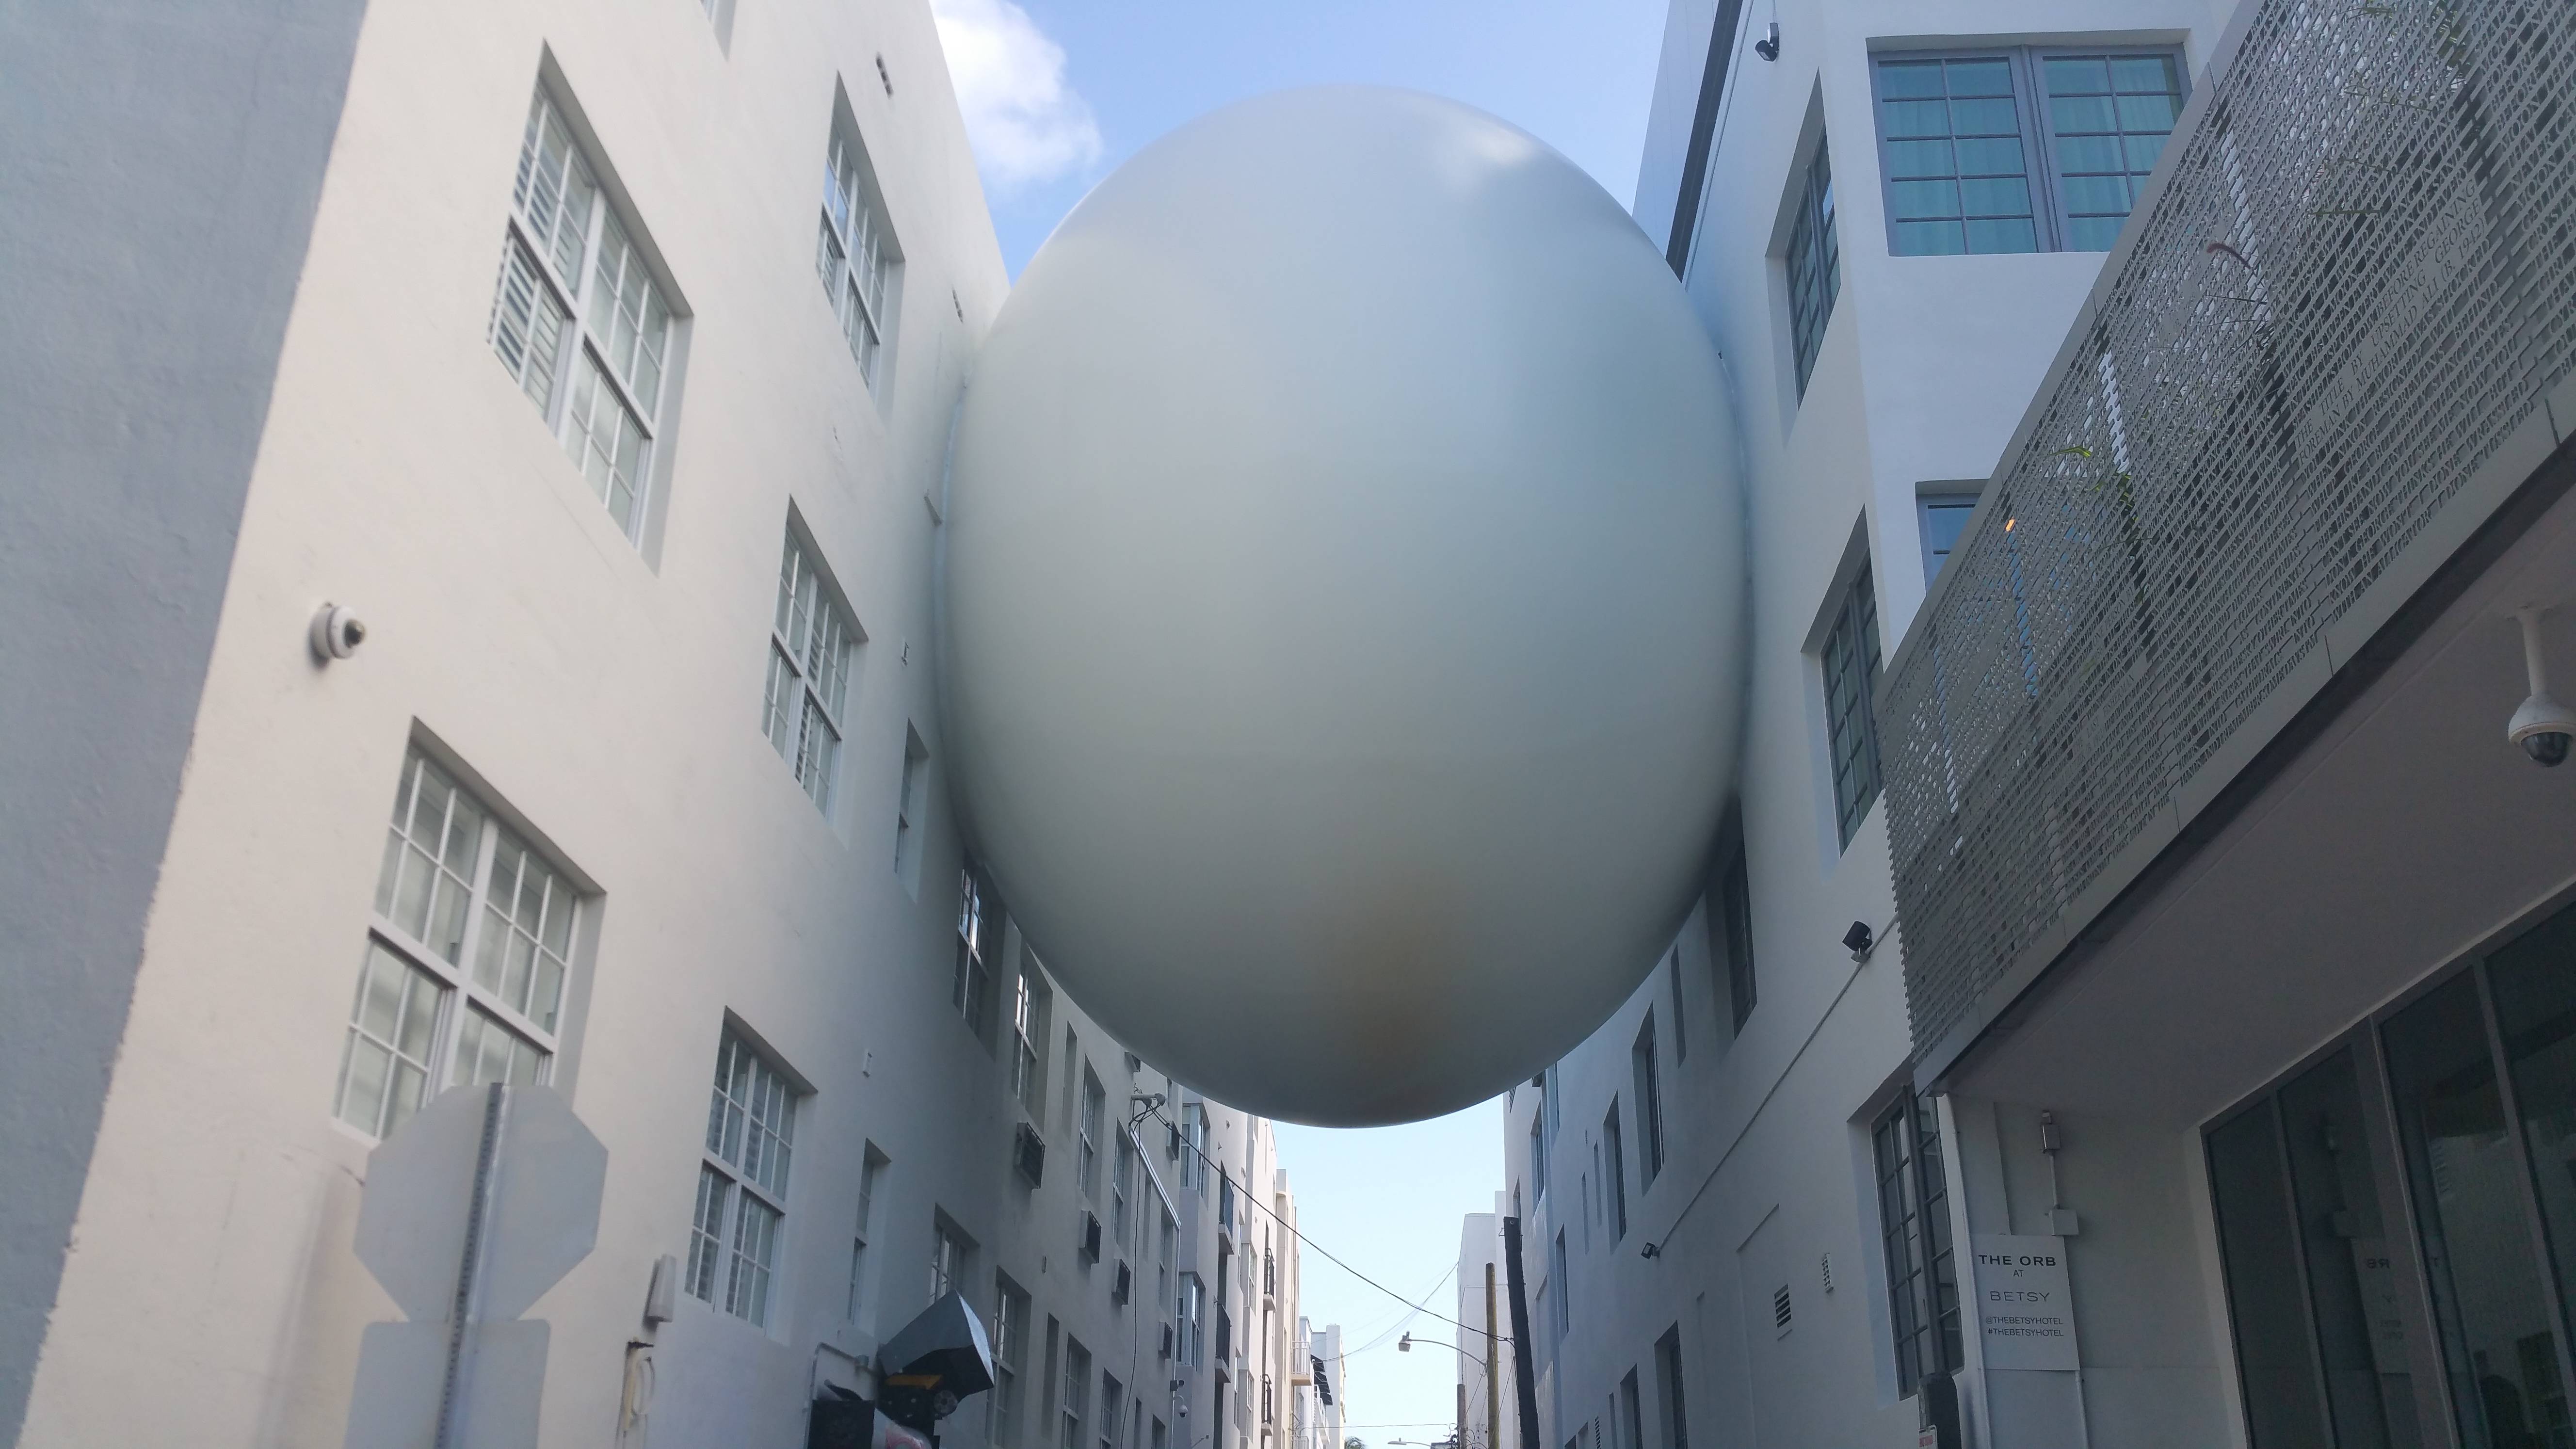 Giant Swiss ball between two buildings in Miami. : whatisthisthing